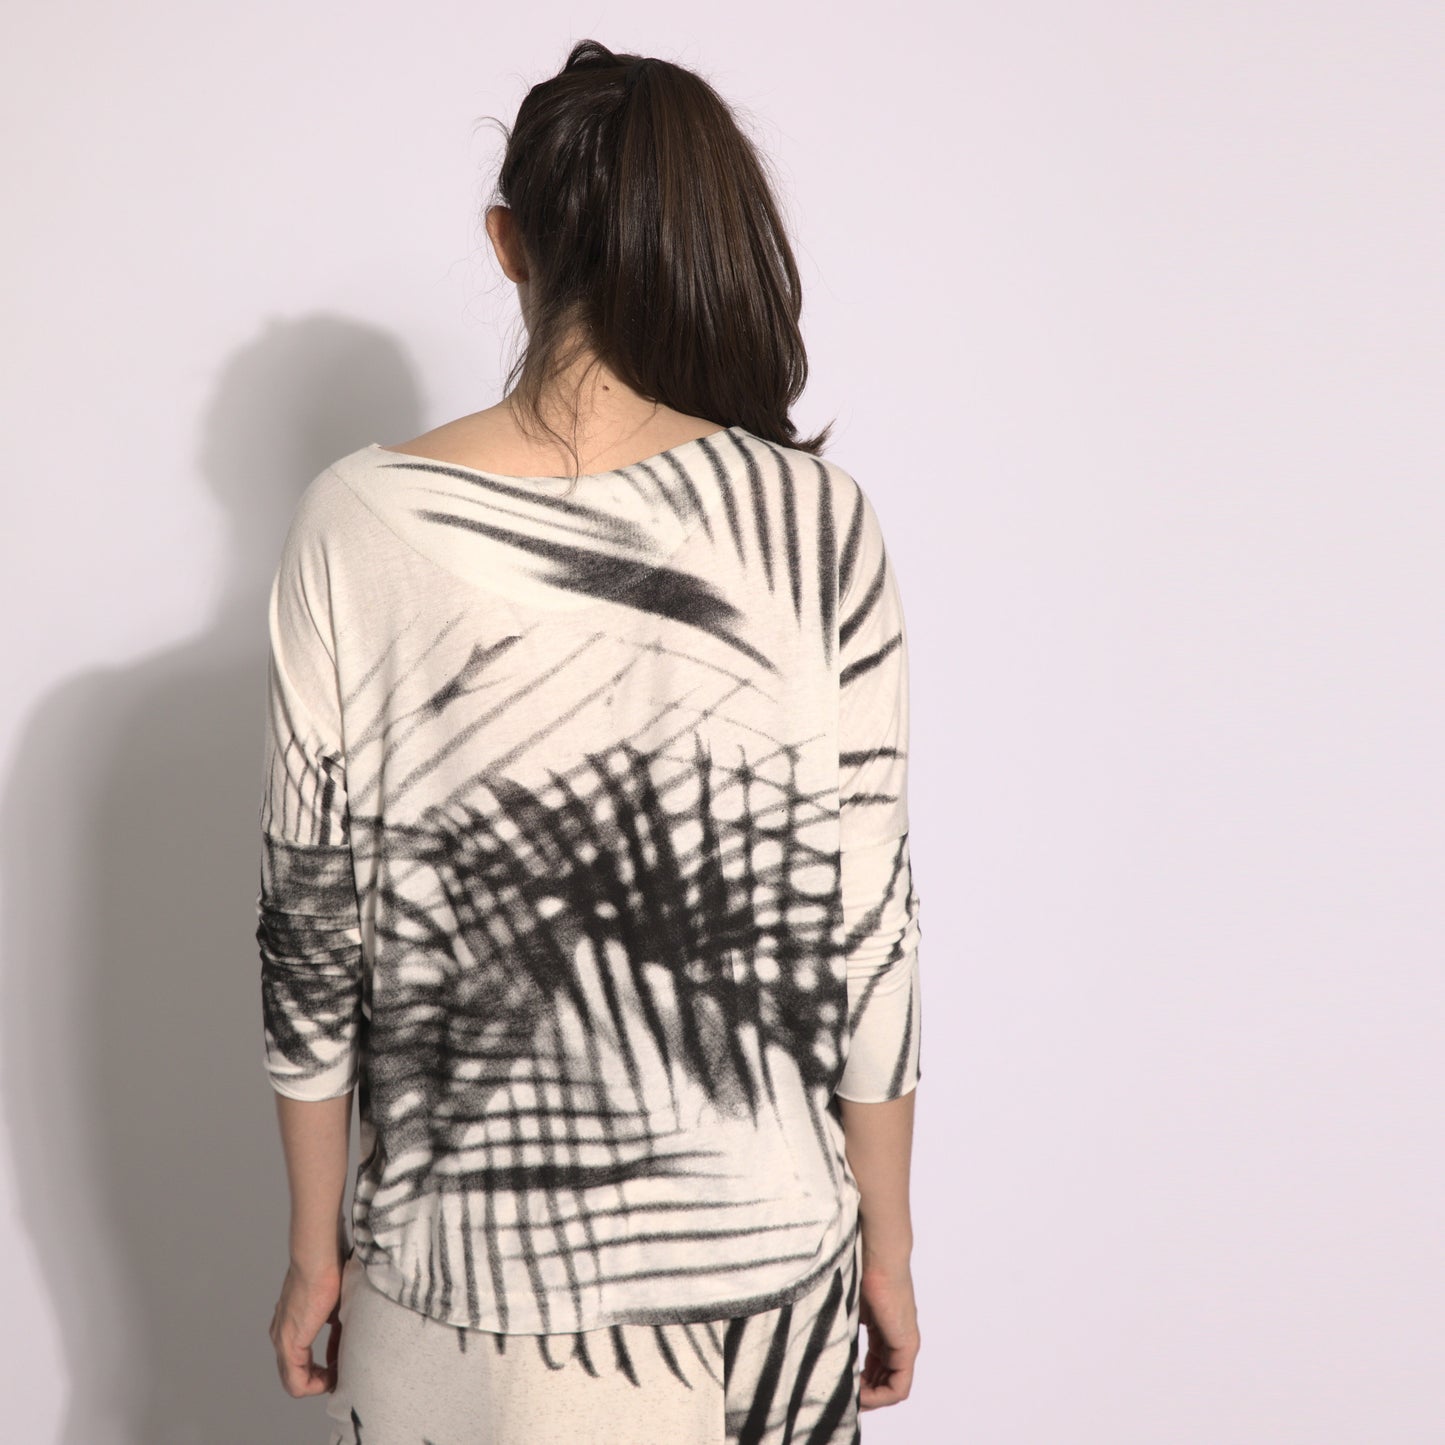 Foliage - Blouse with leaves print